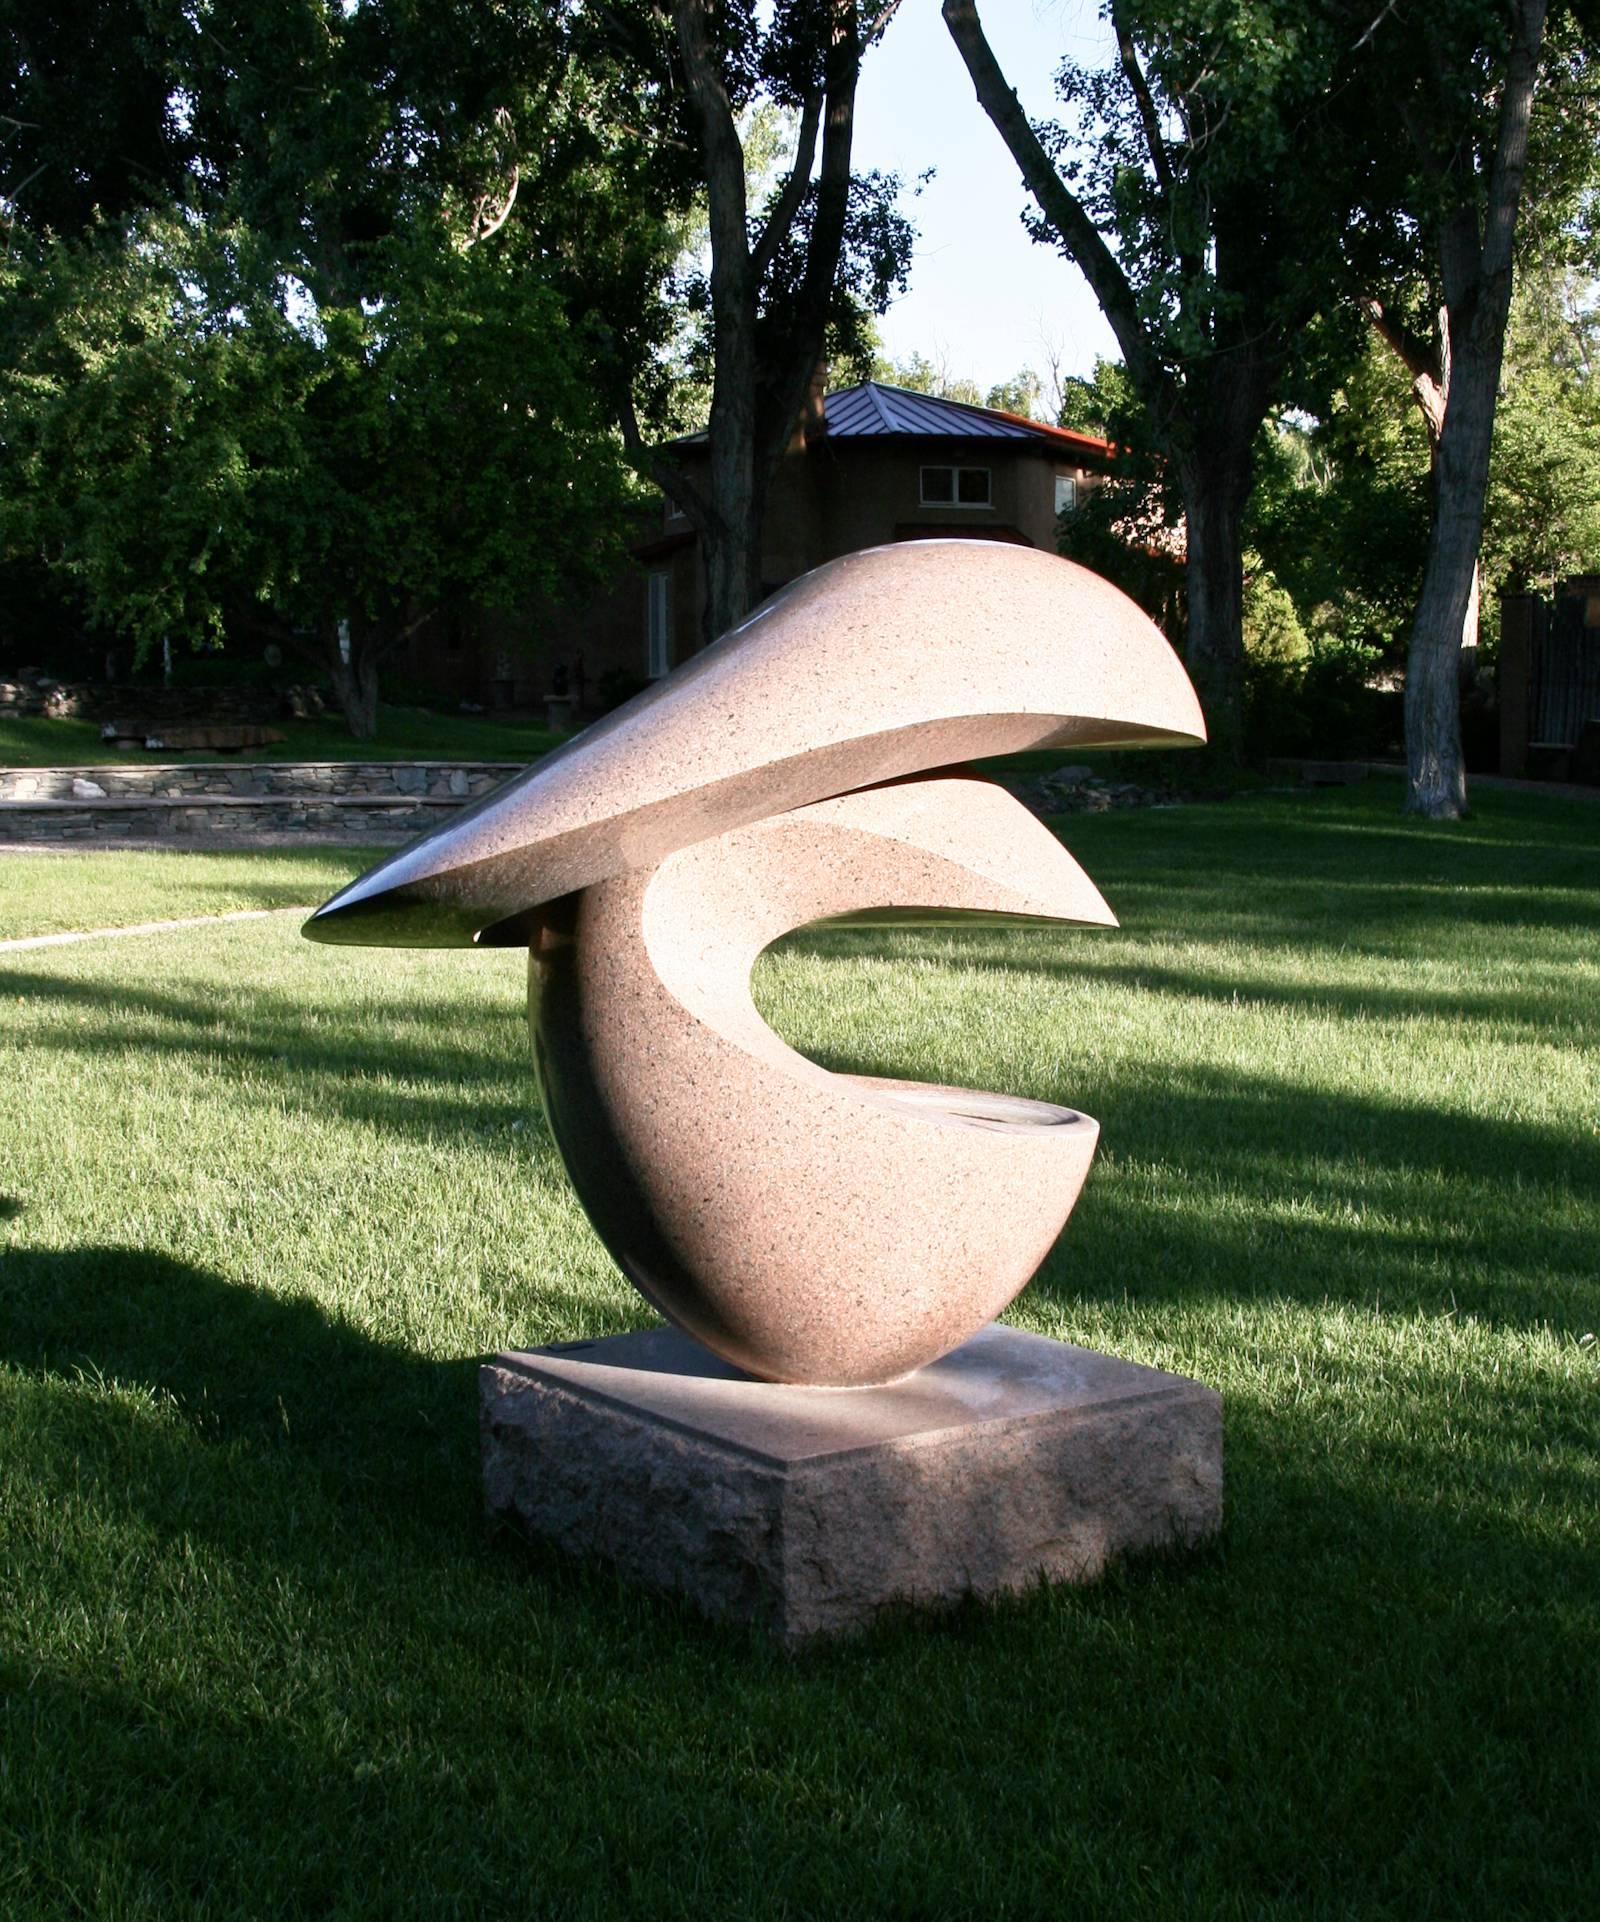 Cosmos, by Khang Pham-New, polished, granite, abstract, sculpture,  outdoor 
Cosmos, polished granite abstract sculpture by Khang Pham-New outdoor sculpture


Light red granite sculpture for outdoor or indoor installation. Sculpture garden ready